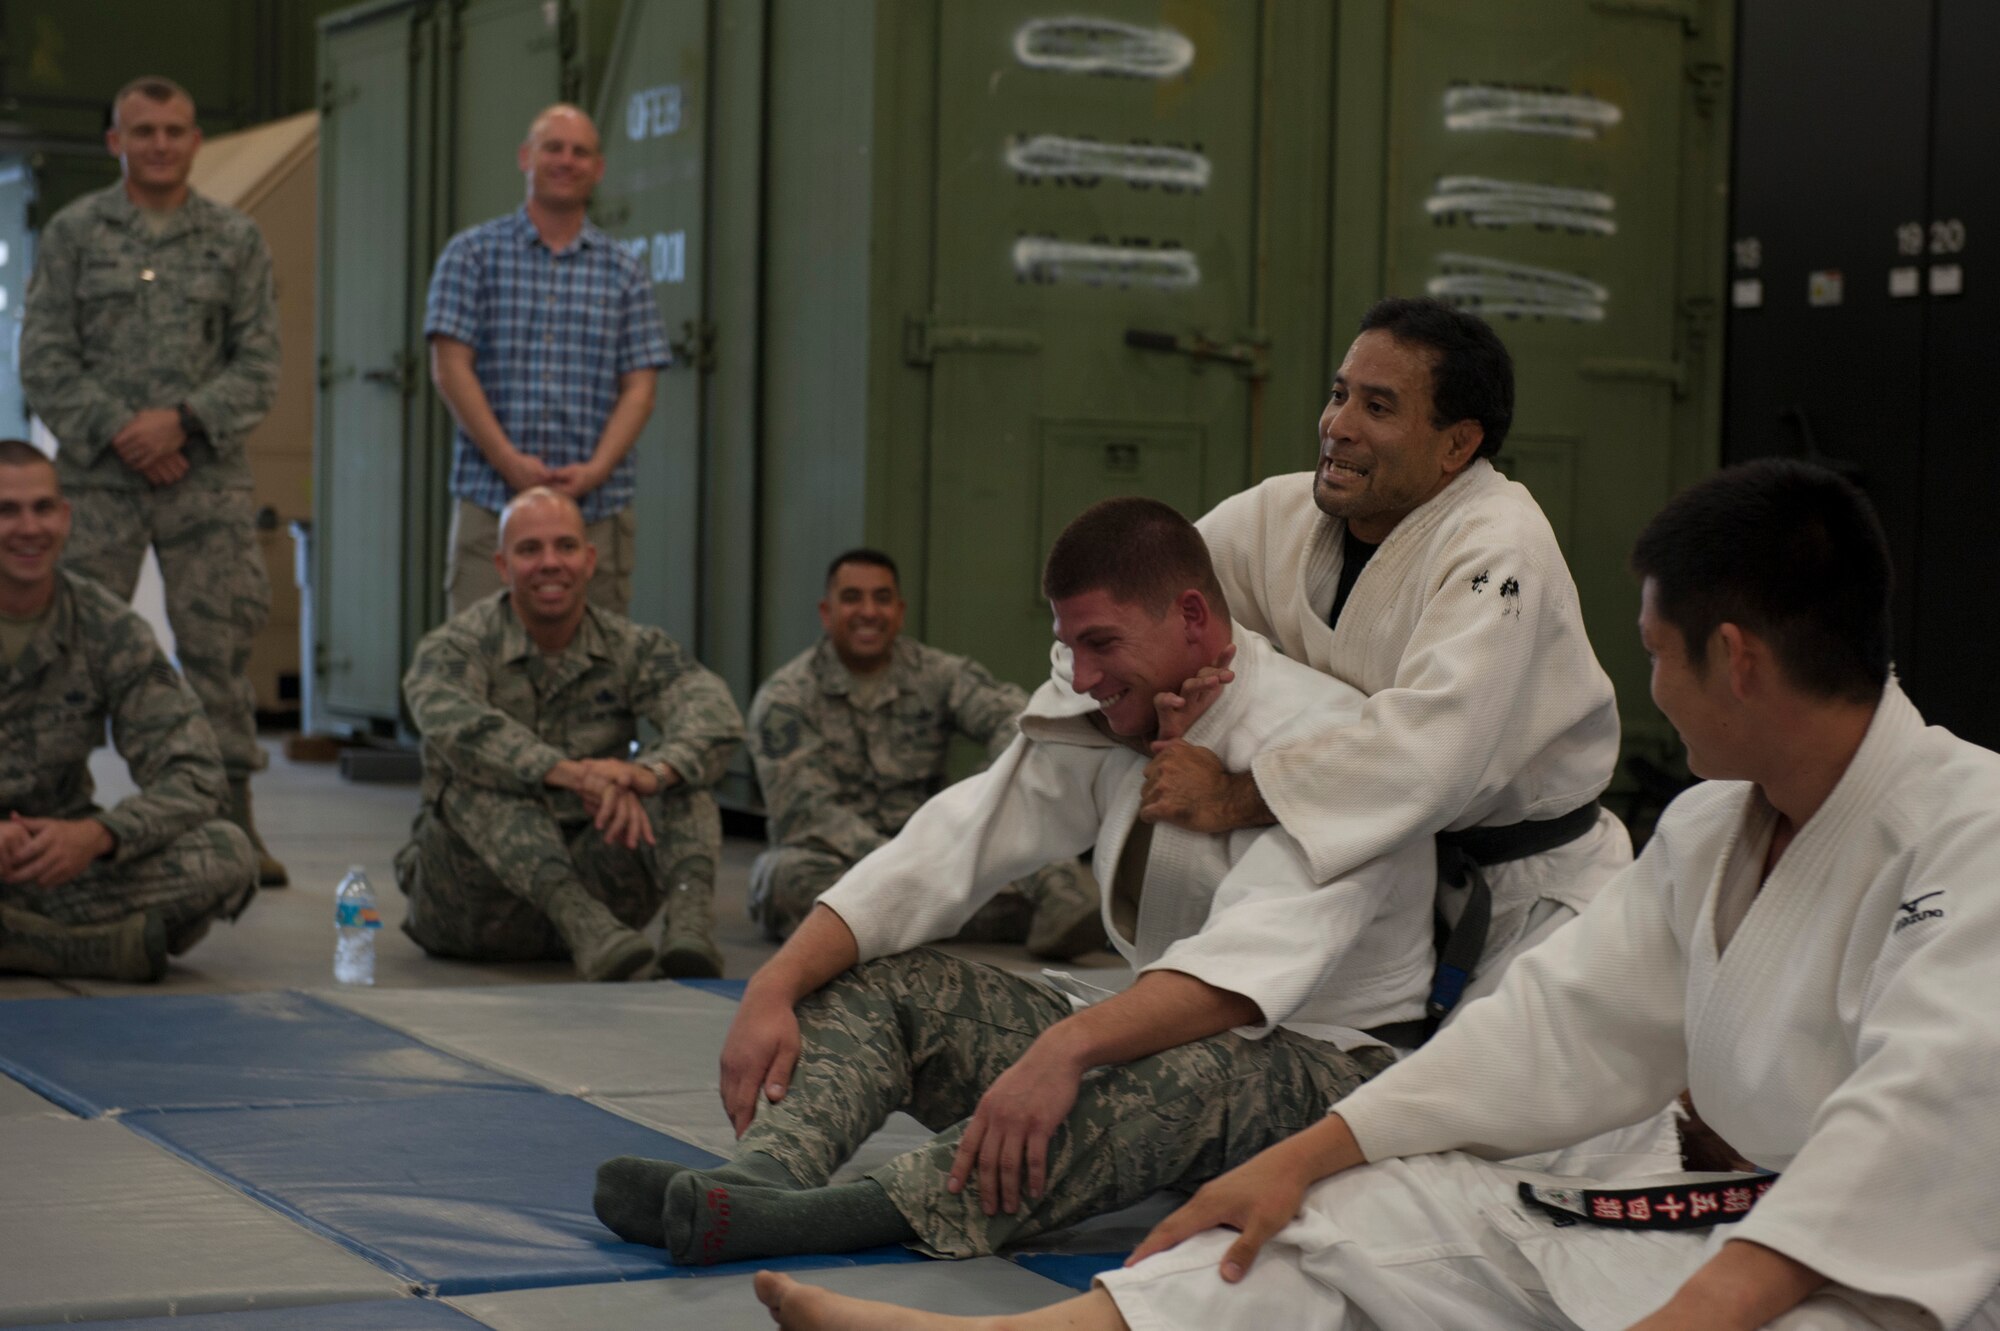 Kei Toguchi, Okinawa Police Station foreign case investigator, first criminal investigator section, performs Judo techniques on Staff Sgt. Michael Starkovich, 18th Security Forces Squadron armory NCO in charge, during the Inaugural Law Enforcement Officer Exchange Oct. 22, 2015, on Kadena Air Base, Japan. The exchange allowed Kadena’s law enforcement to see some of the tactics used by the Okinawan police. (U.S. Air Force photo by Airman 1st Class Lynette M. Rolen)